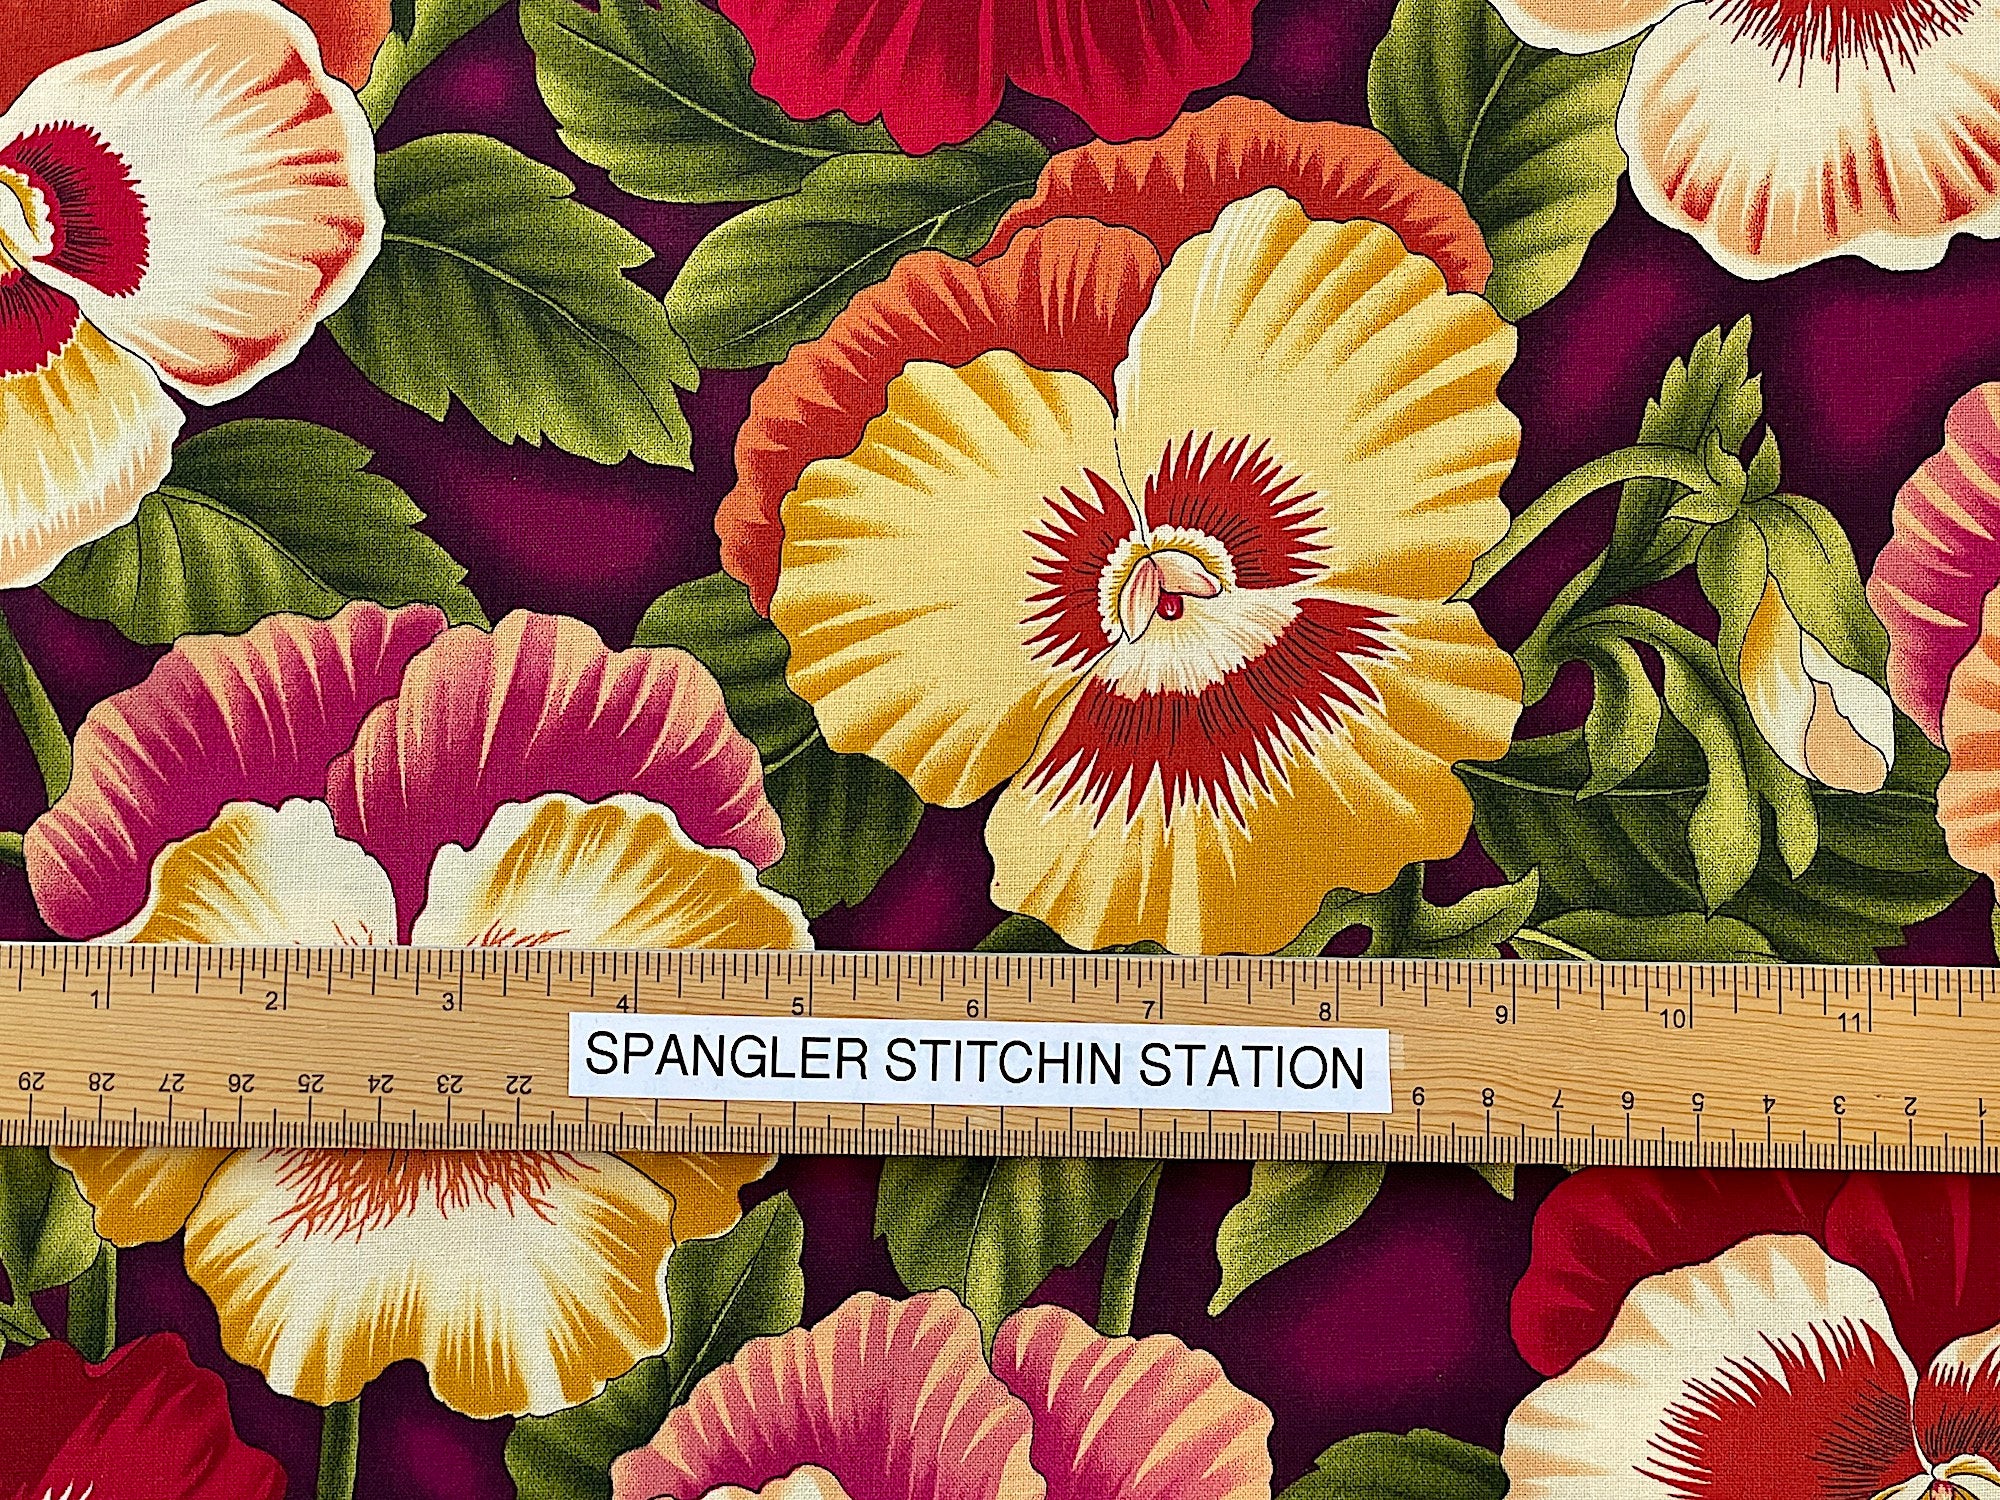 Ruler on fabric to show the size of the pansies.